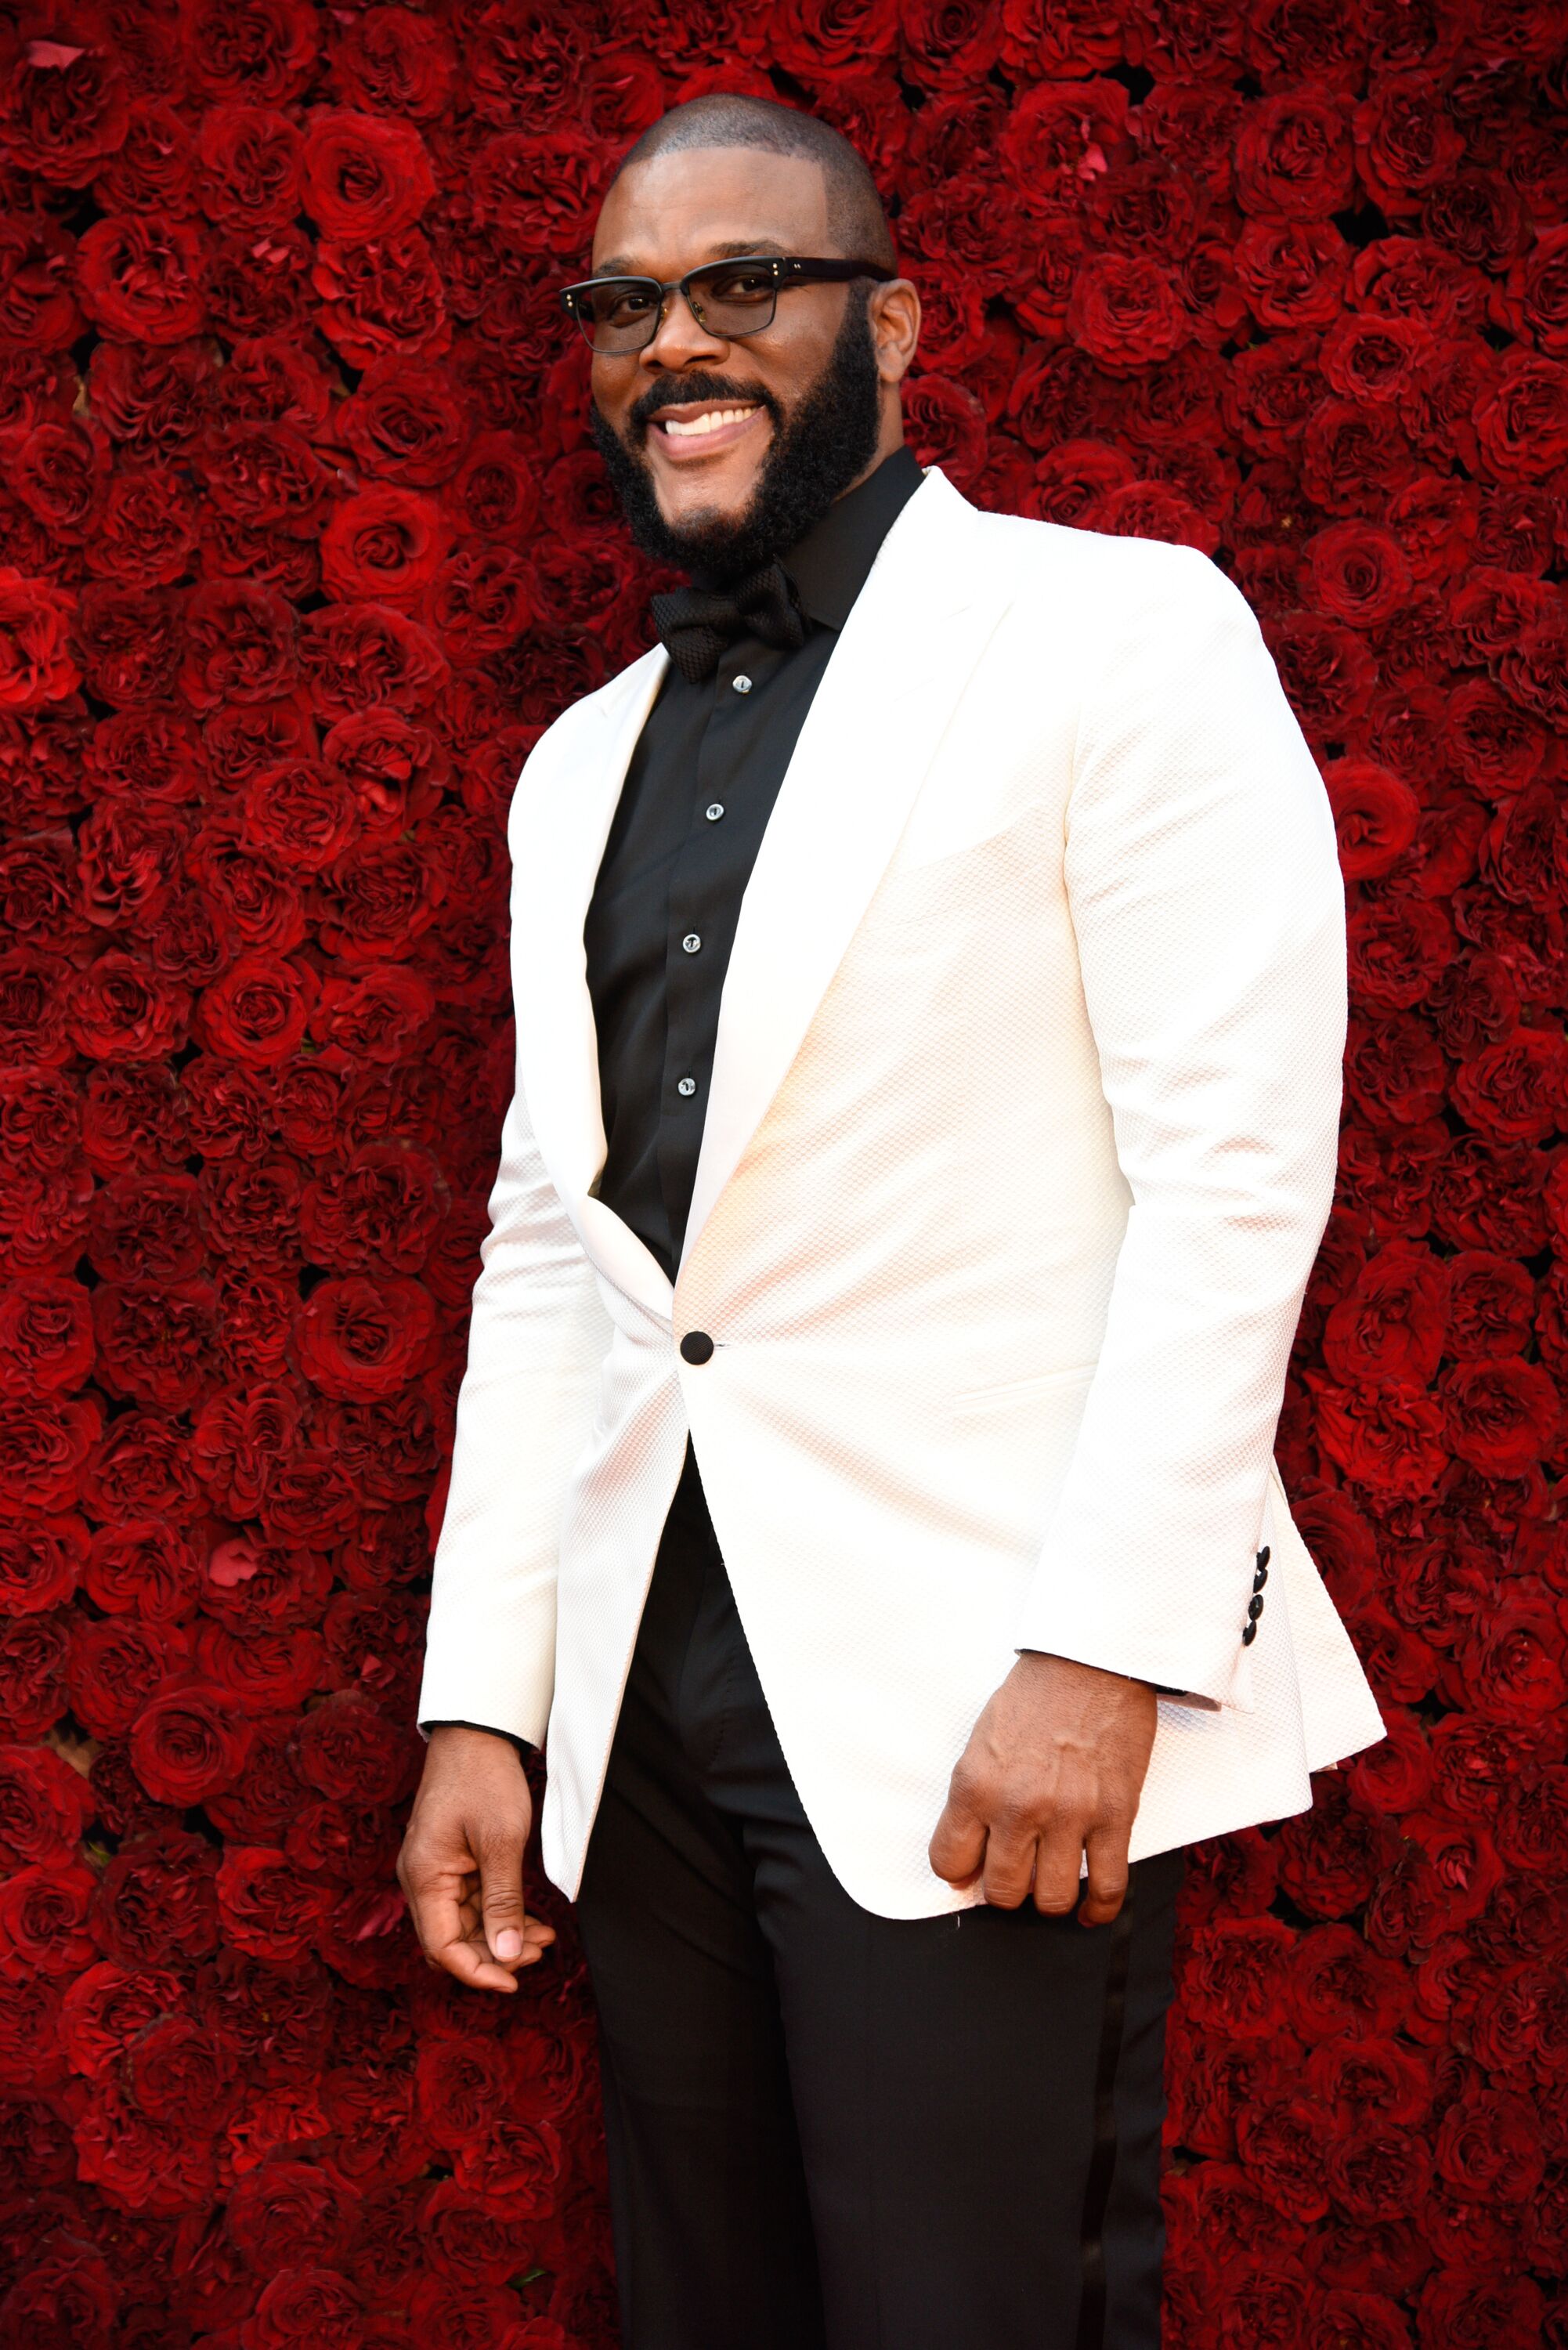 Tyler Perry at the opening gala of the Tyler Perry Studios in Atlanta in 2019/ Source: Getty Images